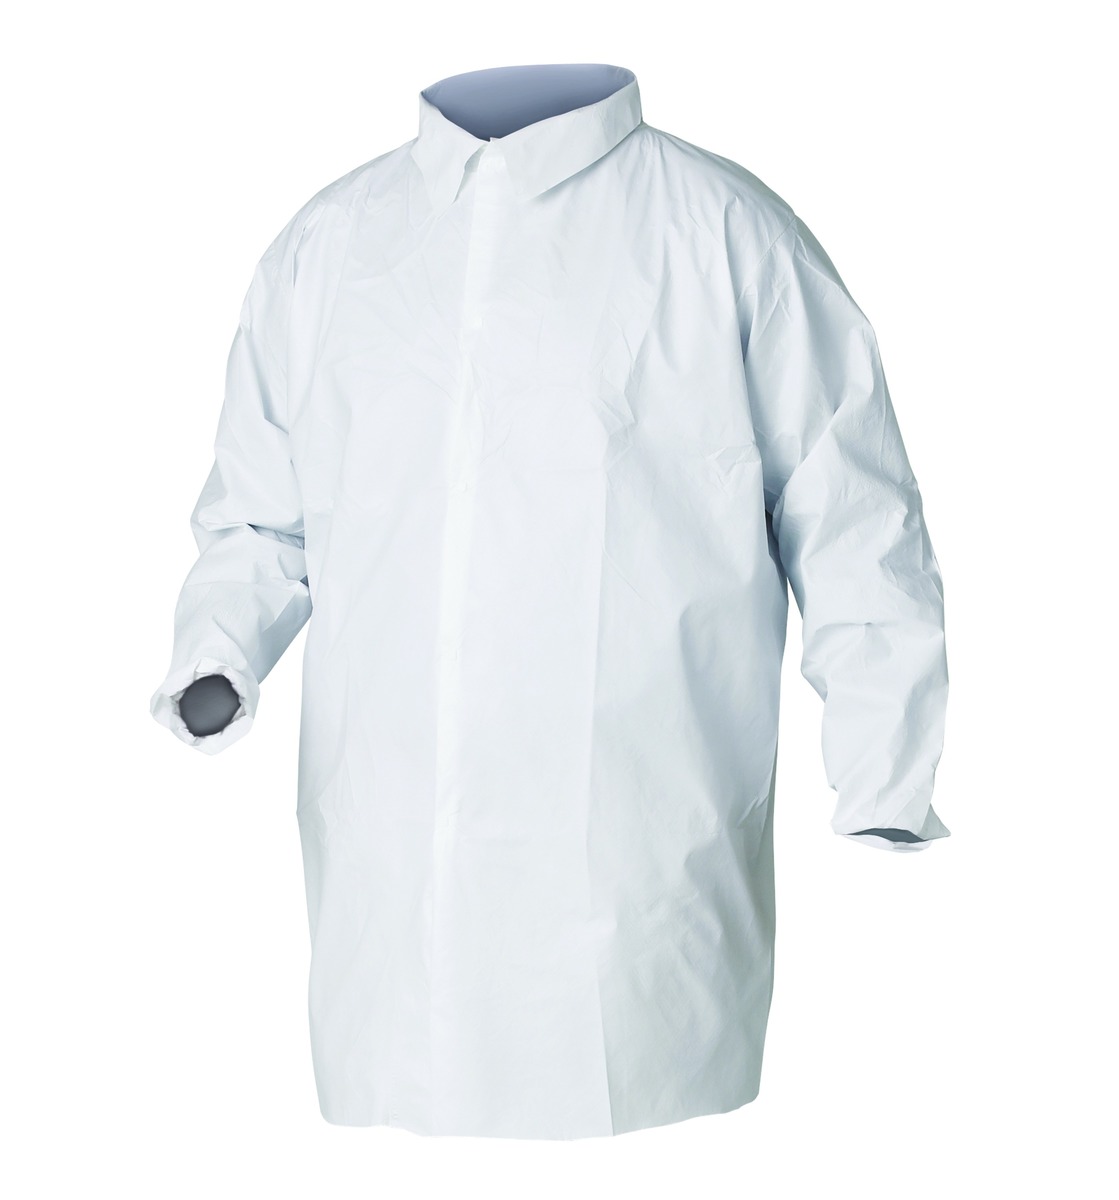 Kimberly-Clark Professional* X-Large White KleenGuard* A20 SMS Disposable Lab Coat/Lab Jacket (Availability restrictions apply.)